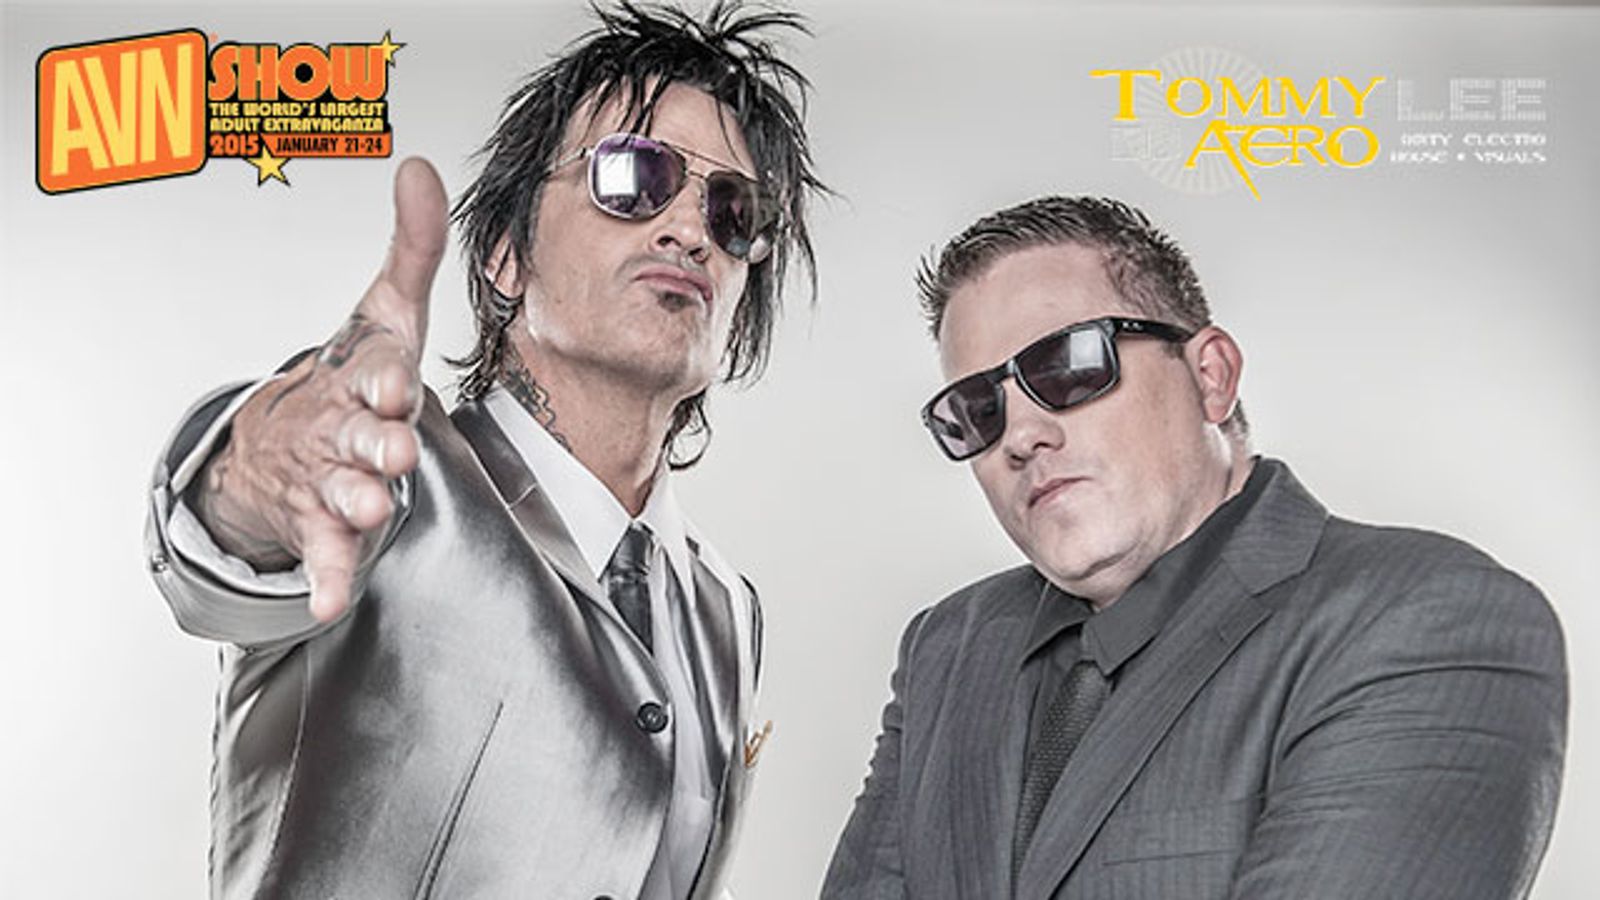 AEE's LATATA White Party Shines Bright With Tommy Lee, DJ Aero